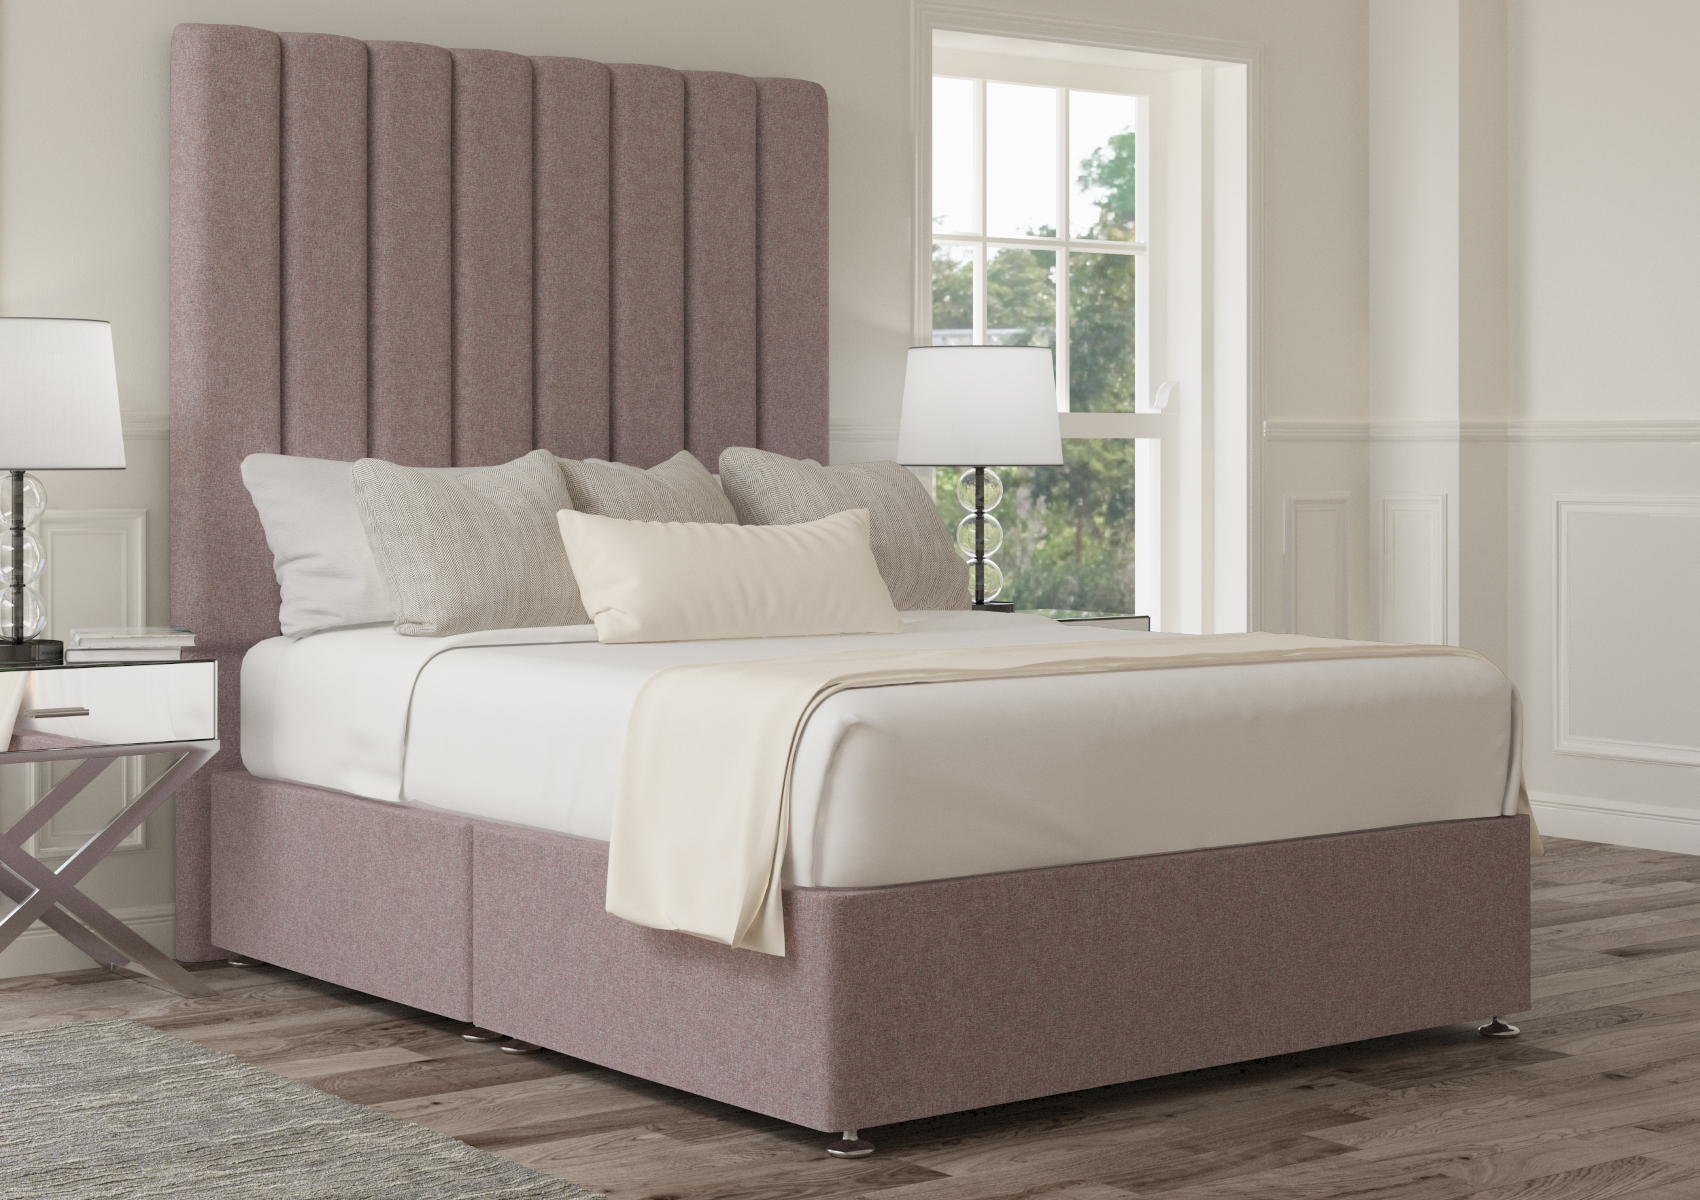 View Esme Arran Pebble Upholstered Double Bed Time4Sleep information